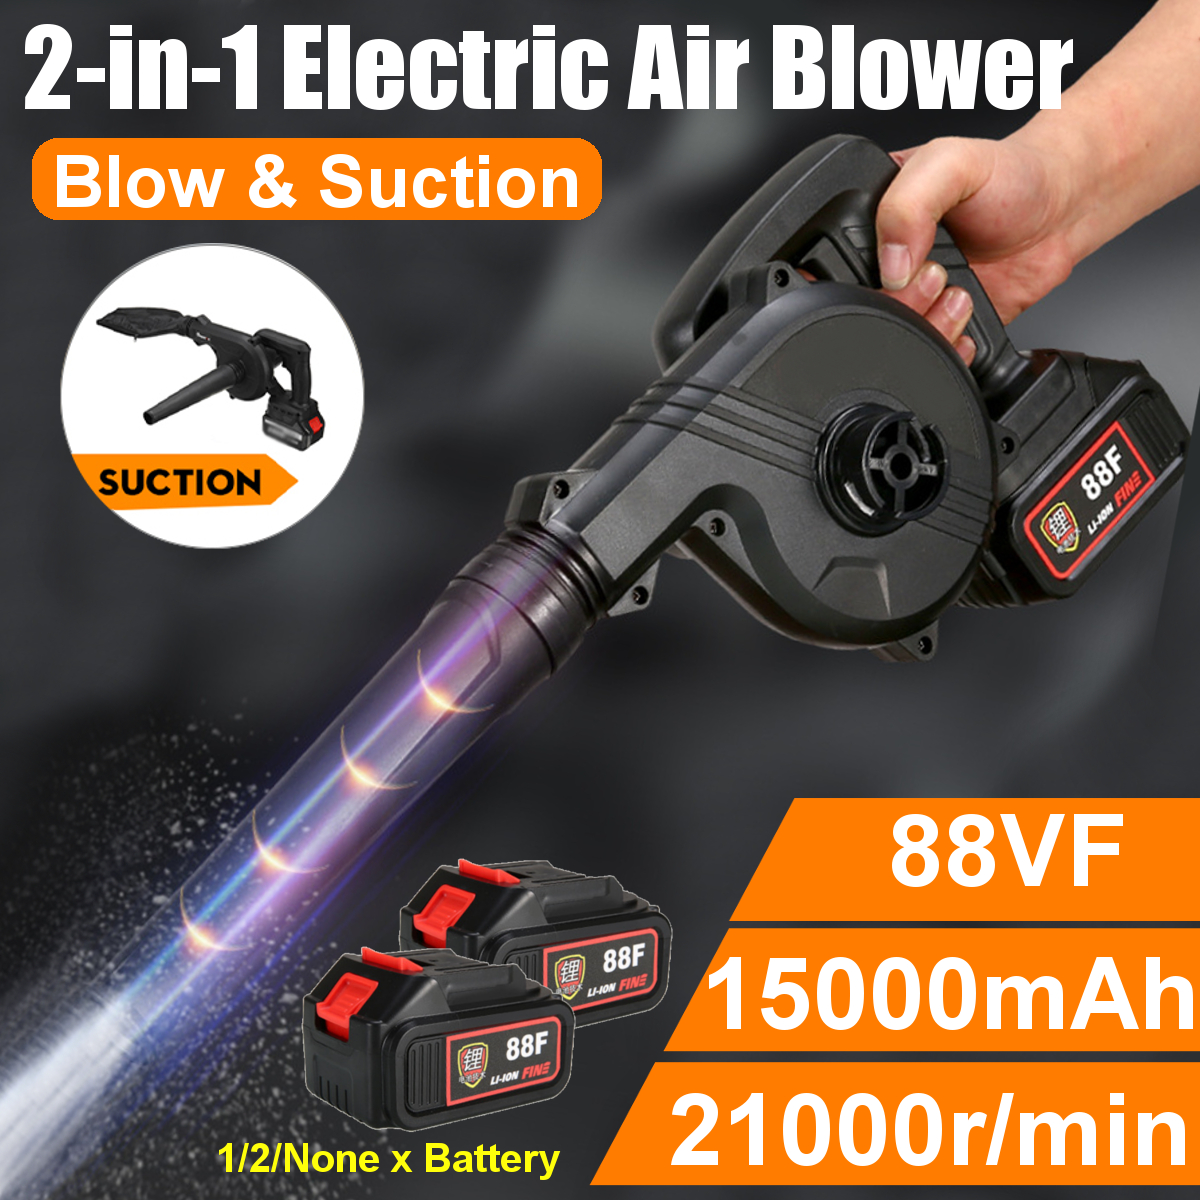 2-IN-1-Wireless-Rechargeable-Electric-Air-Blower--Vacuum-Suction-Dust-Cleaner-7-Speeds-W-None12-Batt-1858550-2